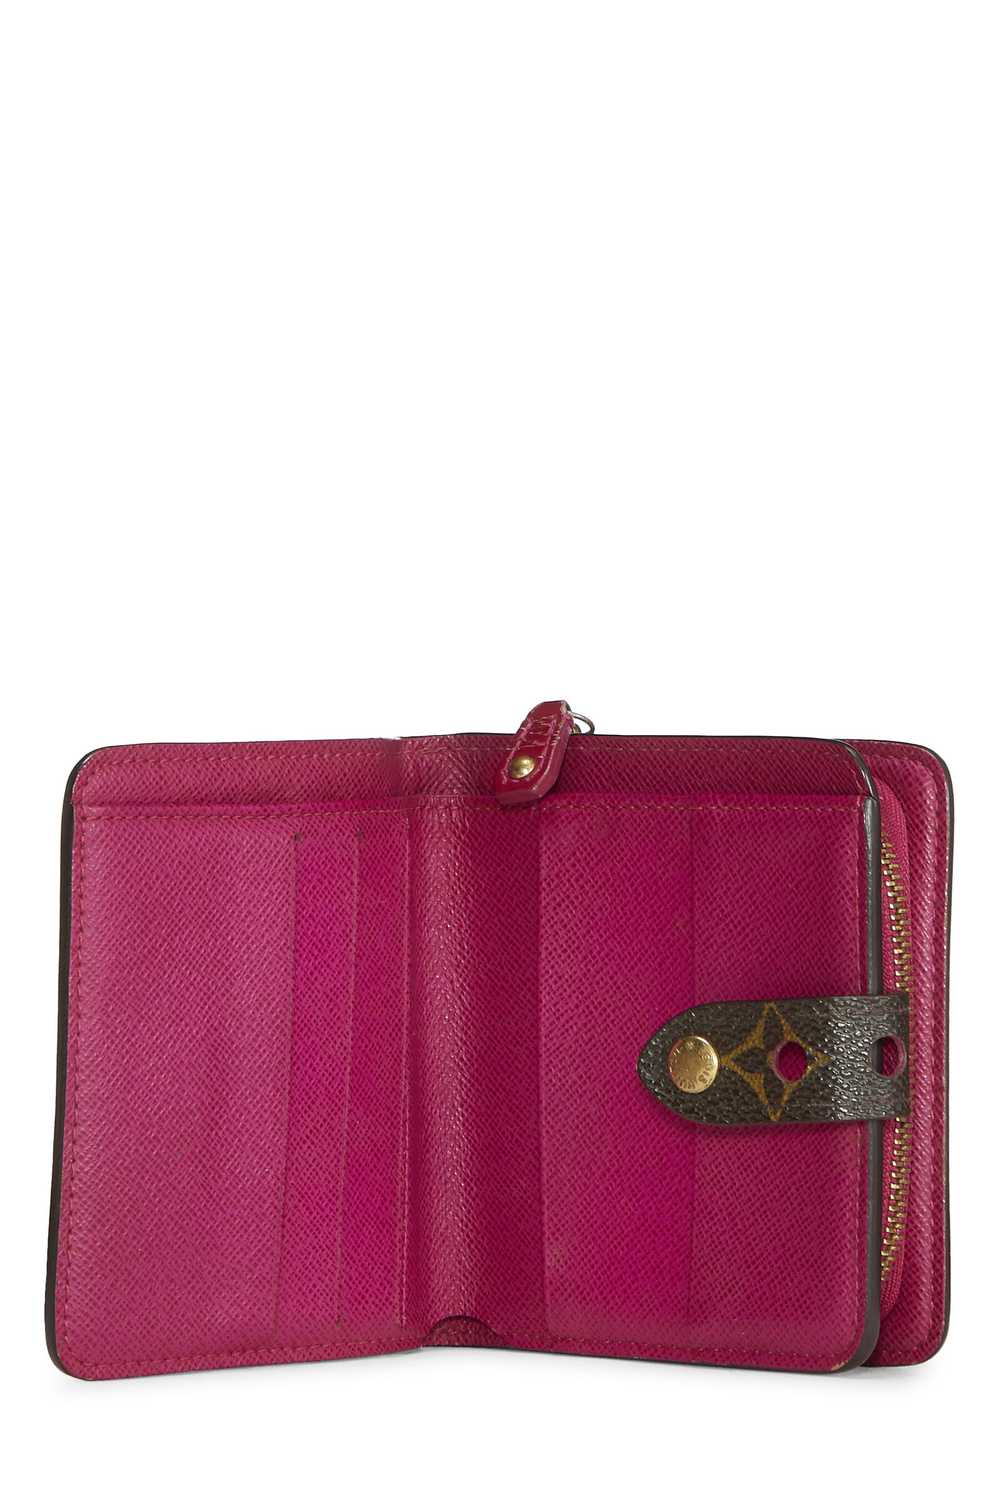 Pink Monogram Canvas Perforated Zippy Compact - image 4